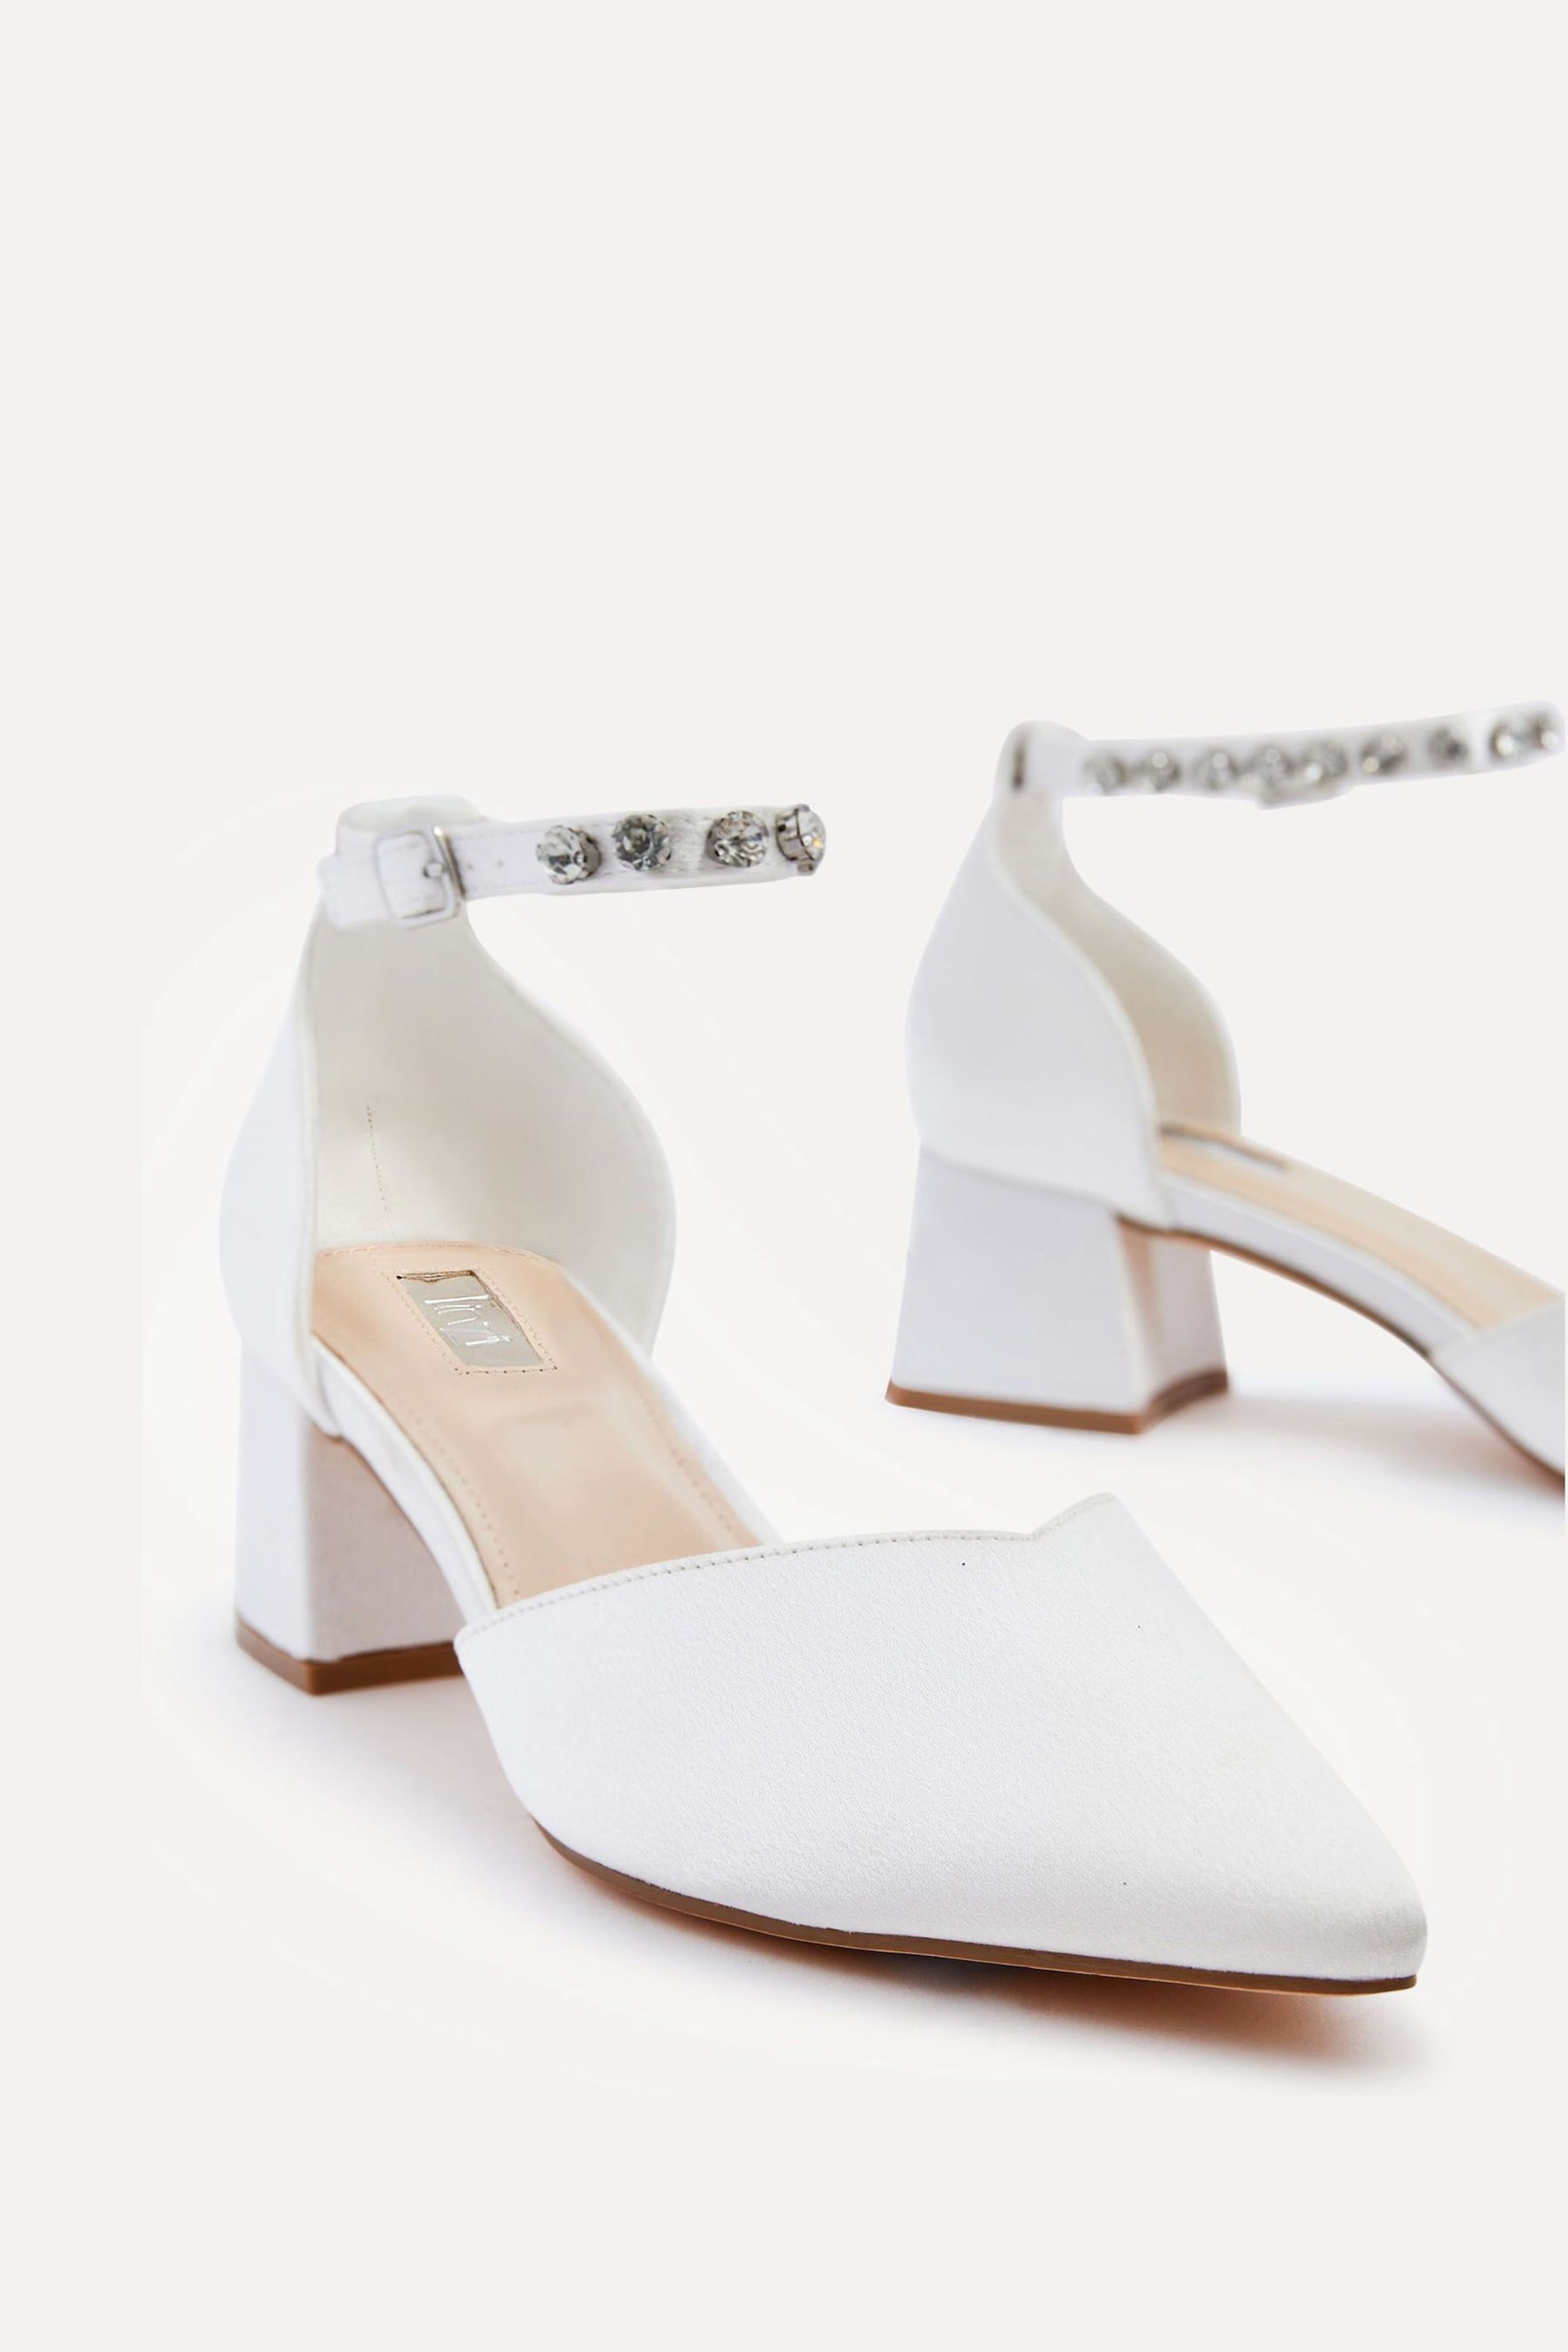 Linzi Natural Jordanna Ivory Satin Low Block Court Heels With Embellished Ankle Strap - Image 5 of 5